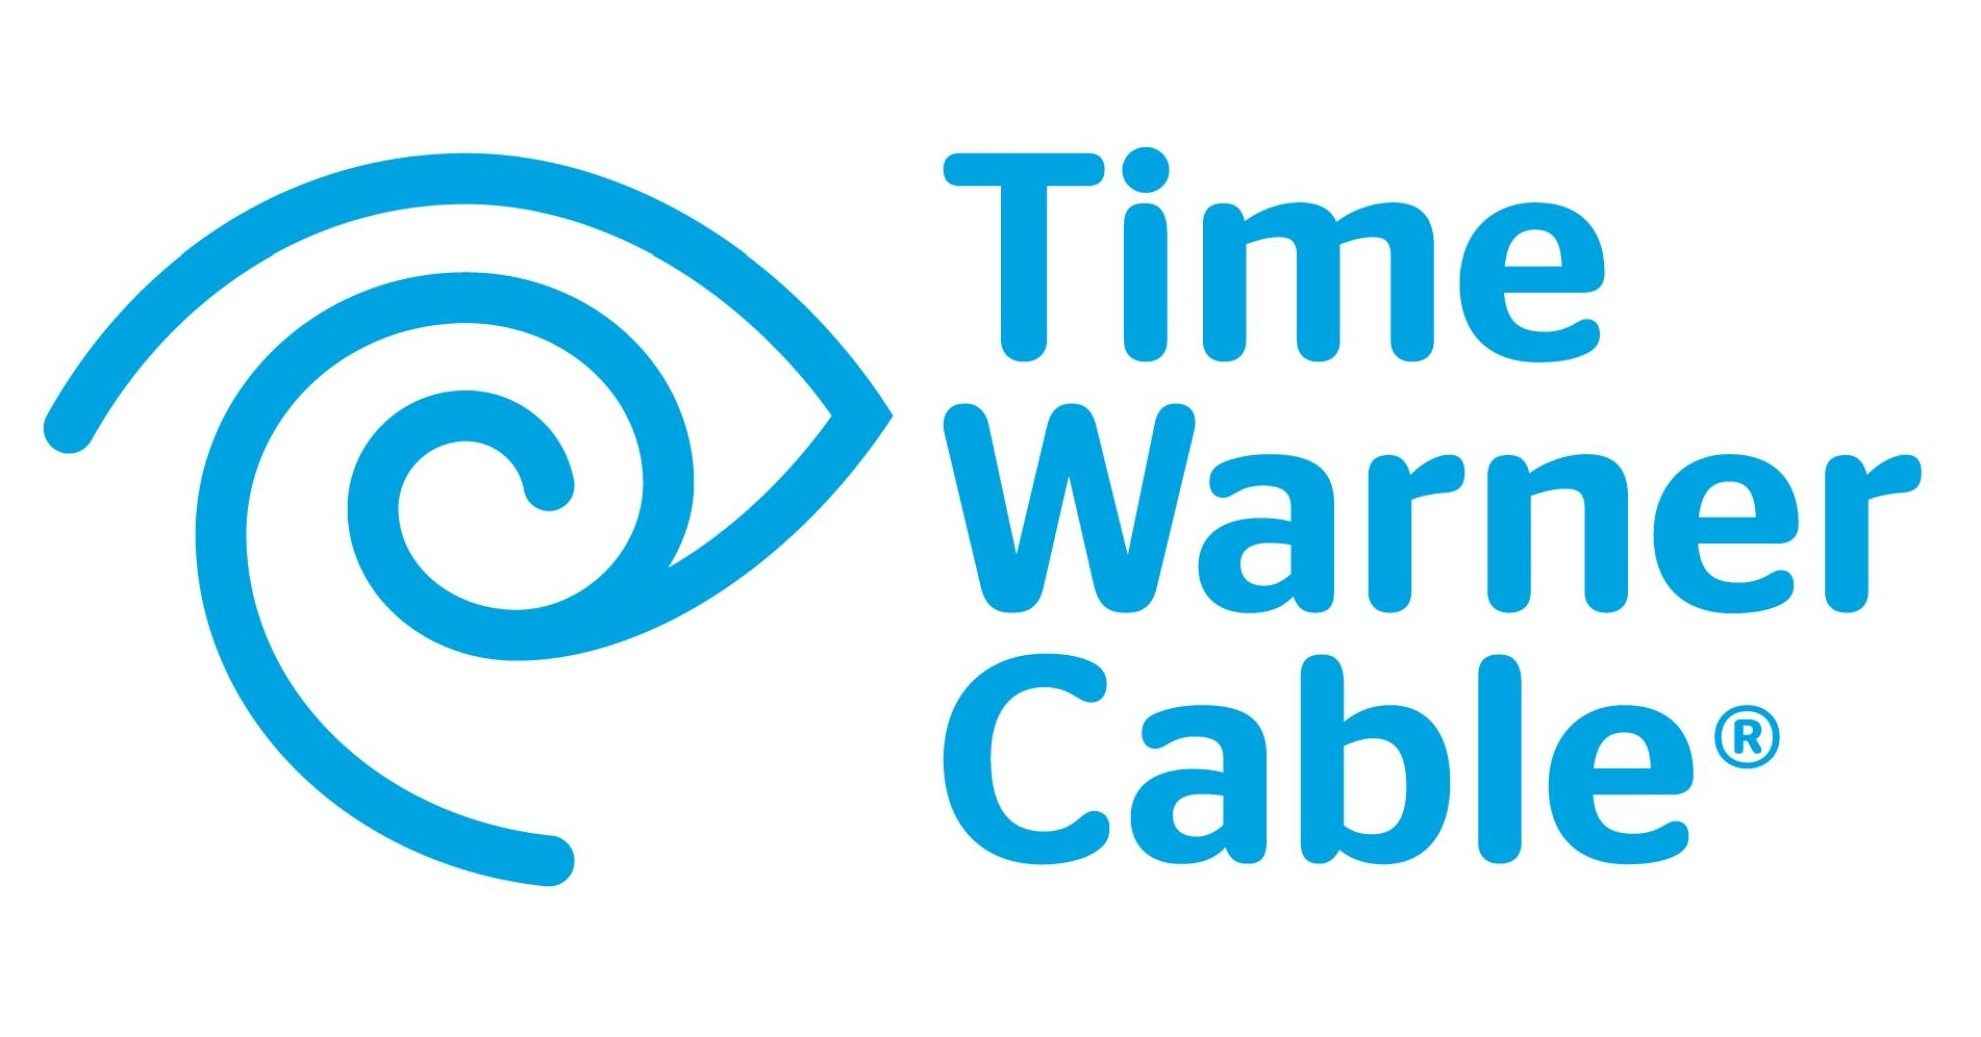 http://www.freelogovectors.net/wp-content/uploads/2012/04/time-warner-cable-logo.jpg